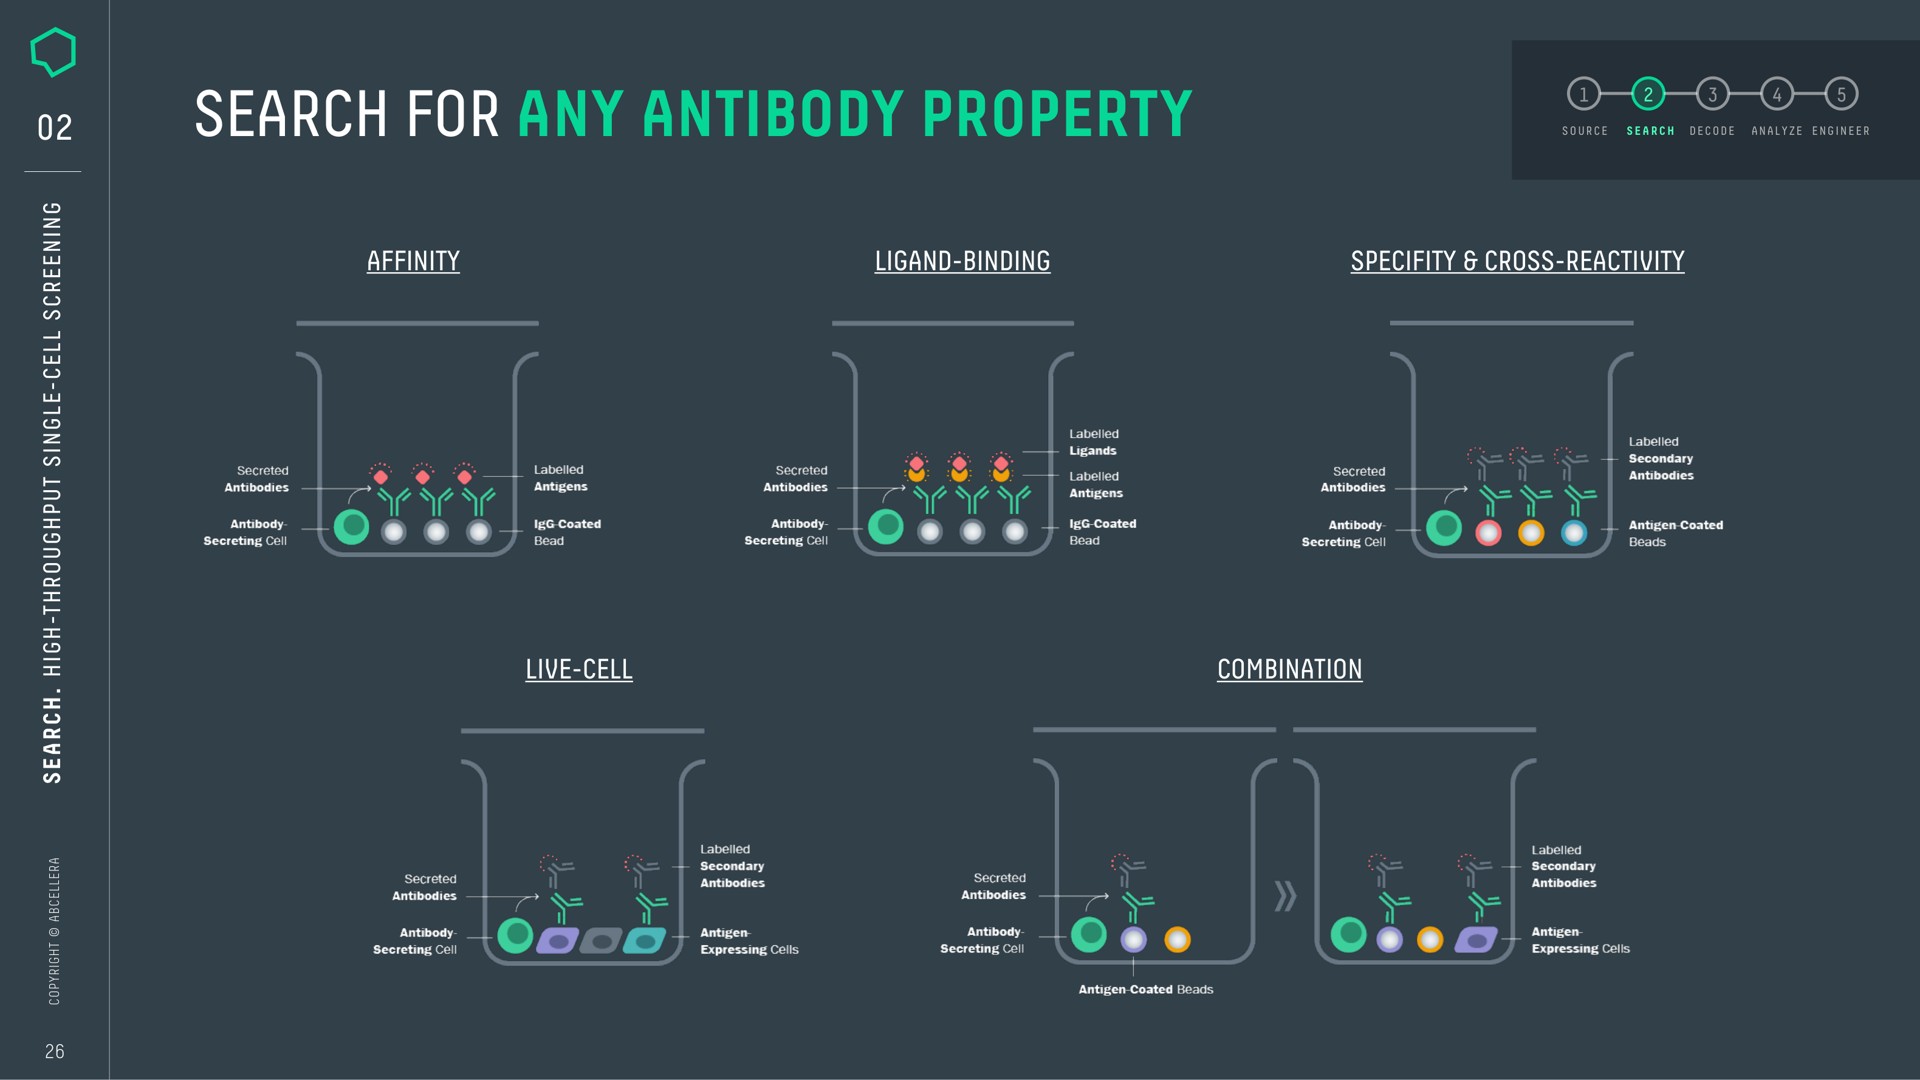 search for any antibody property smee | AbCellera